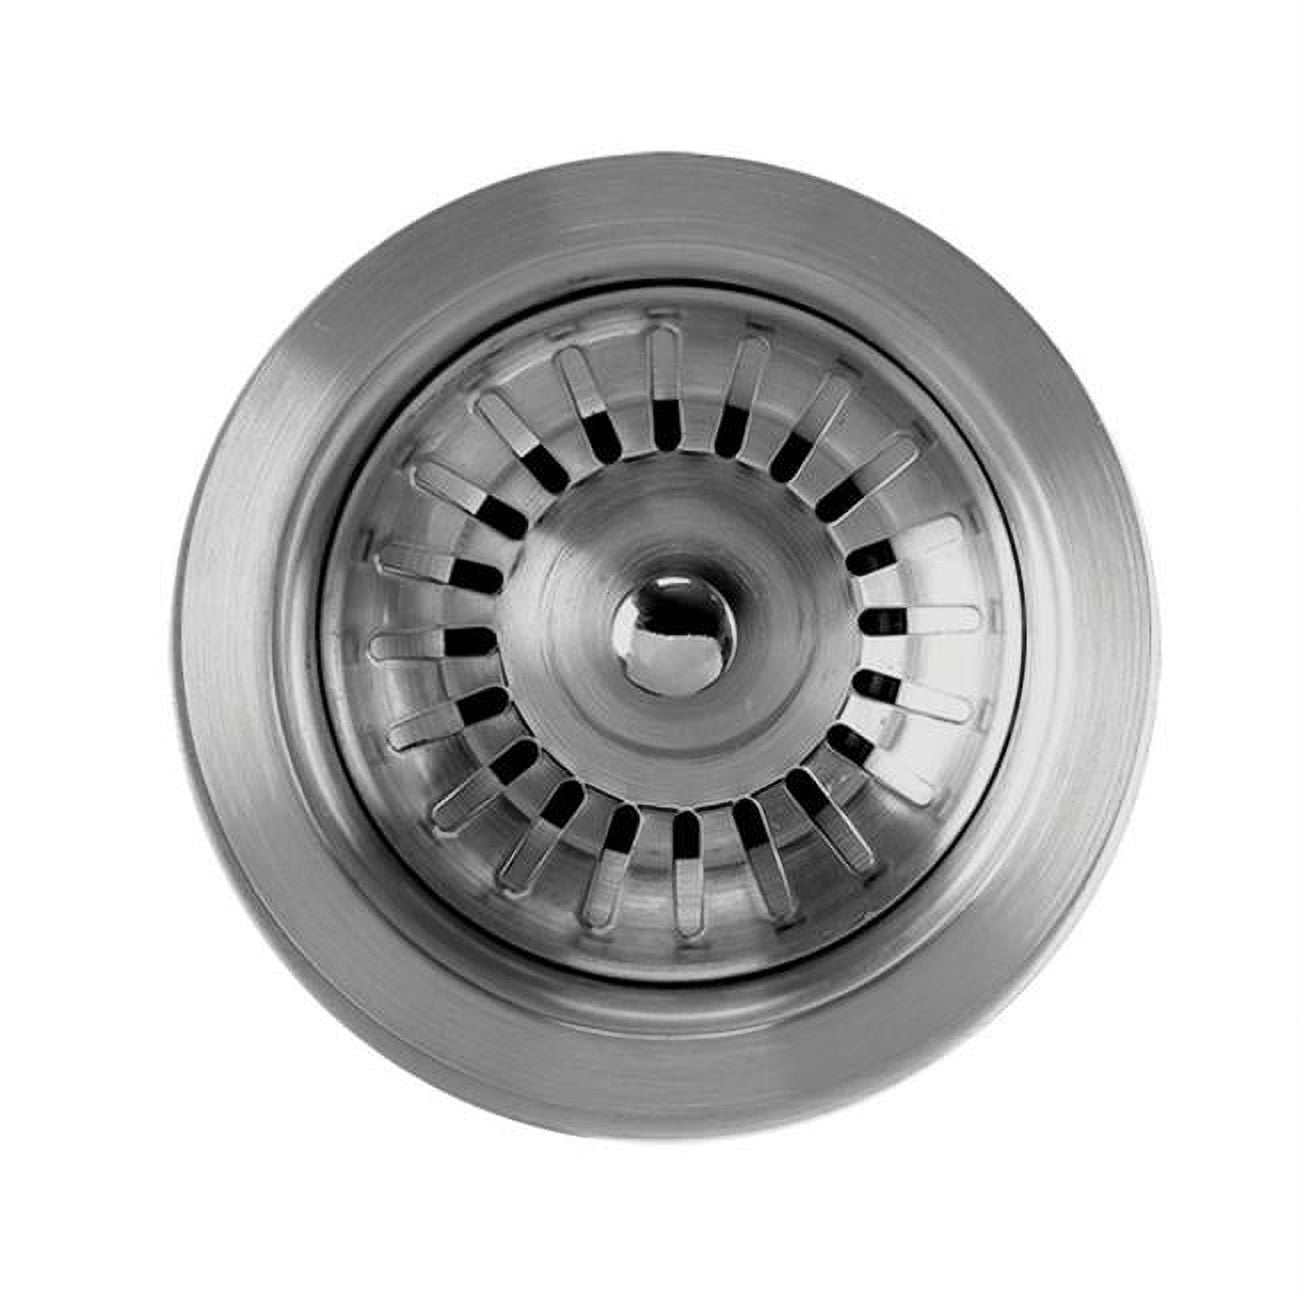 Picture of Alfi Trade WHNPL35-GM 3.5 in. Noah Plus Stainless Steel Basket Strainer - Gunmetal